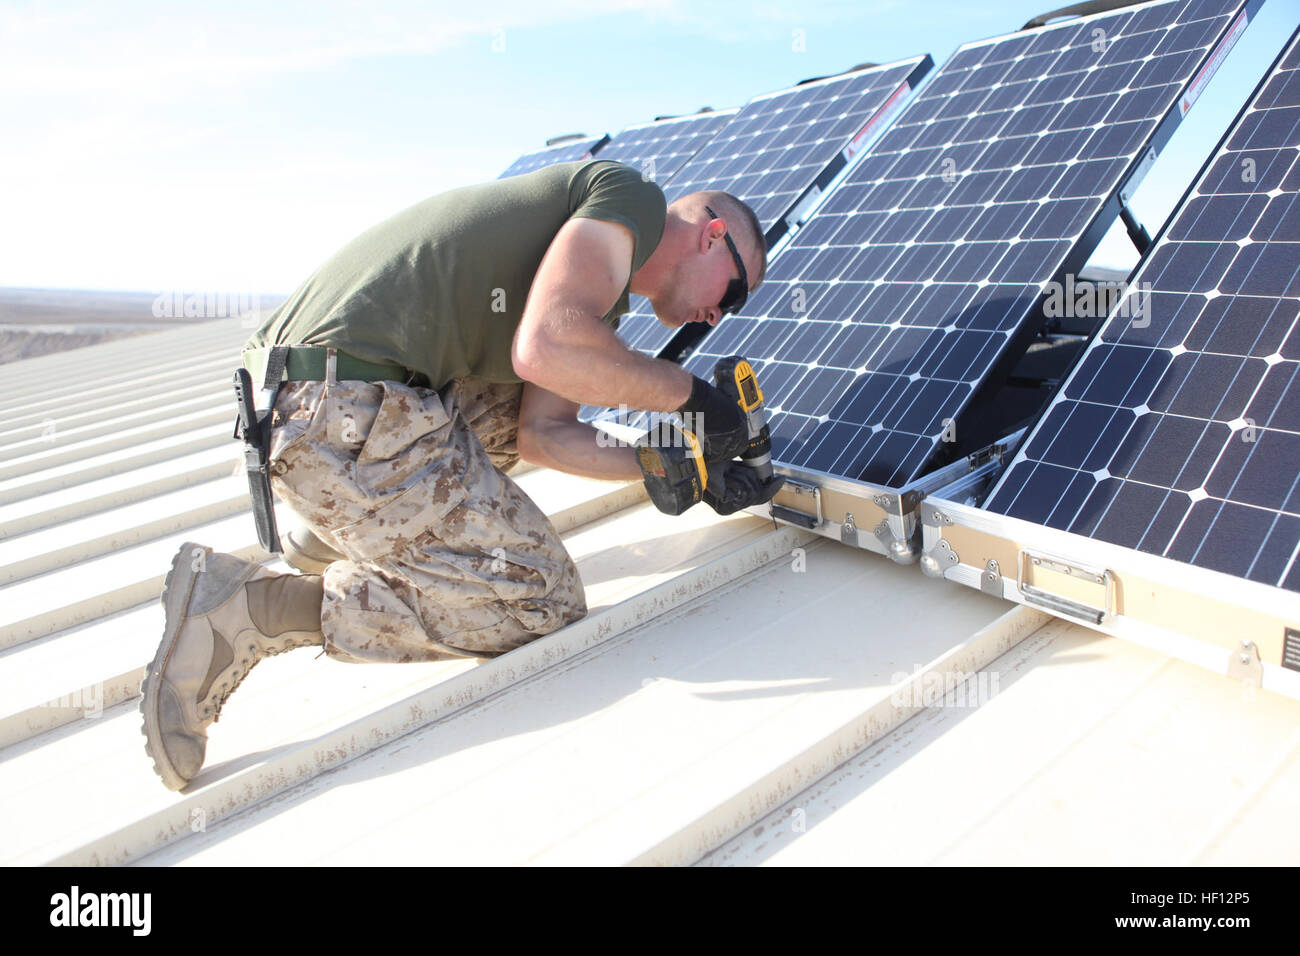 U.S. Marine Corps Cpl. Robert G. Sutton, left, and Cpl. Moses E. Perez, field wireman with Combat Logistics Regiment 15 install new solar panels on Combat Outpost Shukvani, Helmand province, Afghanistan, Nov. 19, 2012. Sutton and Perez installed the solar panels to provide power to radios, laptops, and computers in the event of power outages.(U.S. Marine Corps photo by Lance Cpl. Alexander Quiles/Released) Solar Panel installment 121119-M-SF473-014 Stock Photo